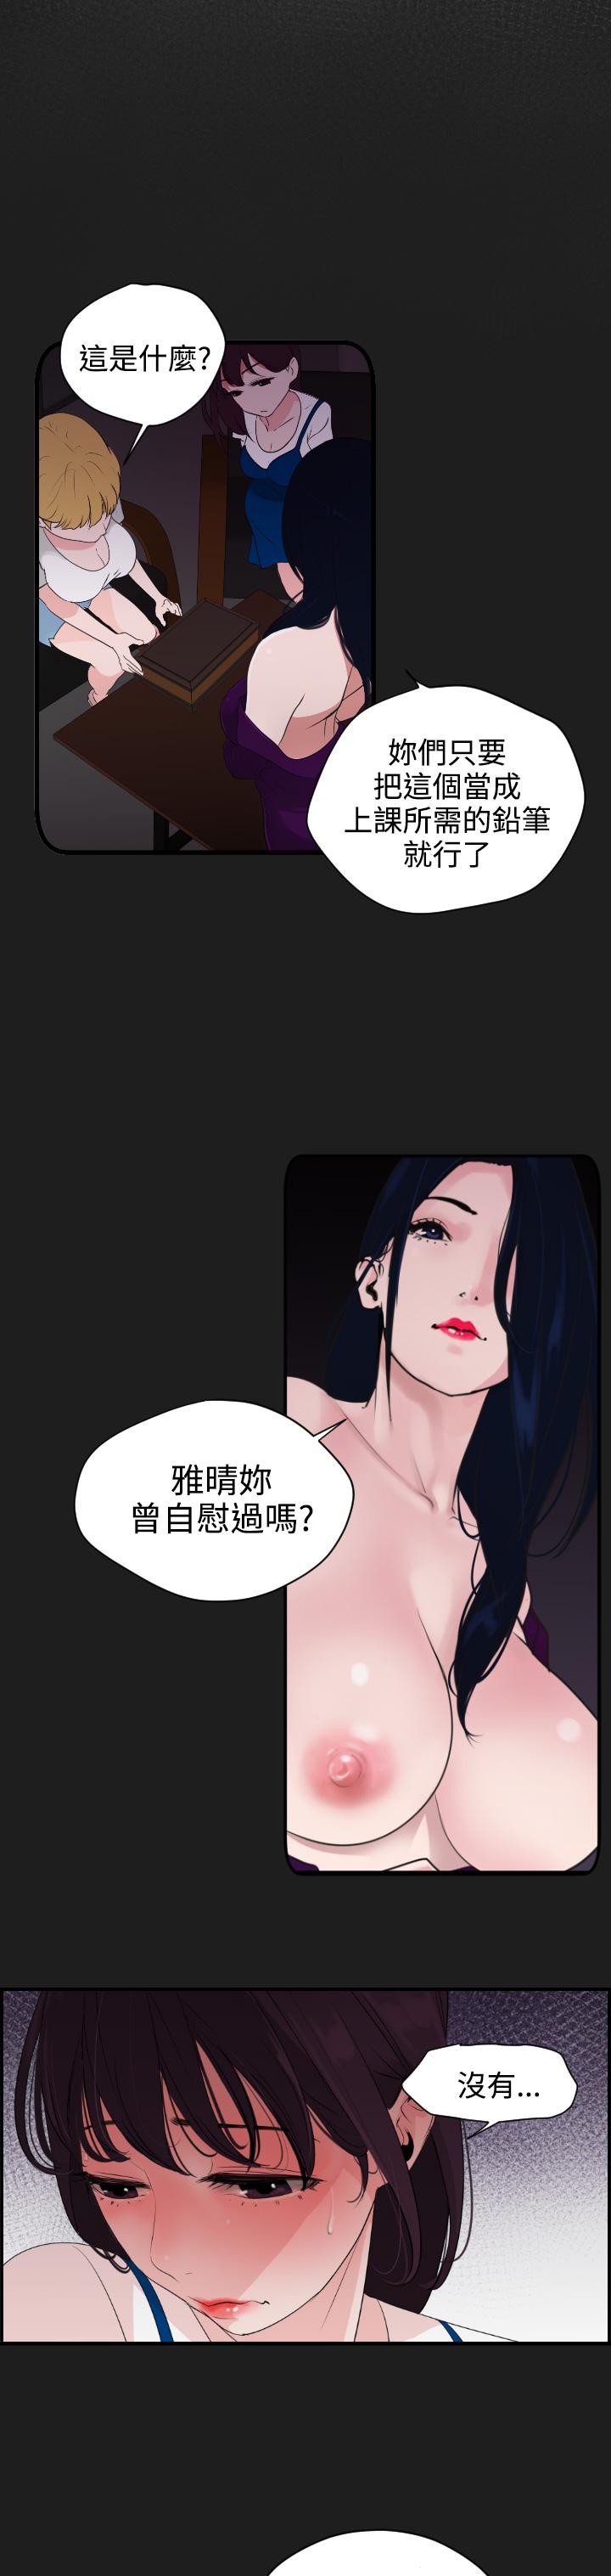 Desire King (慾求王) Ch.1-7 (chinese) 206